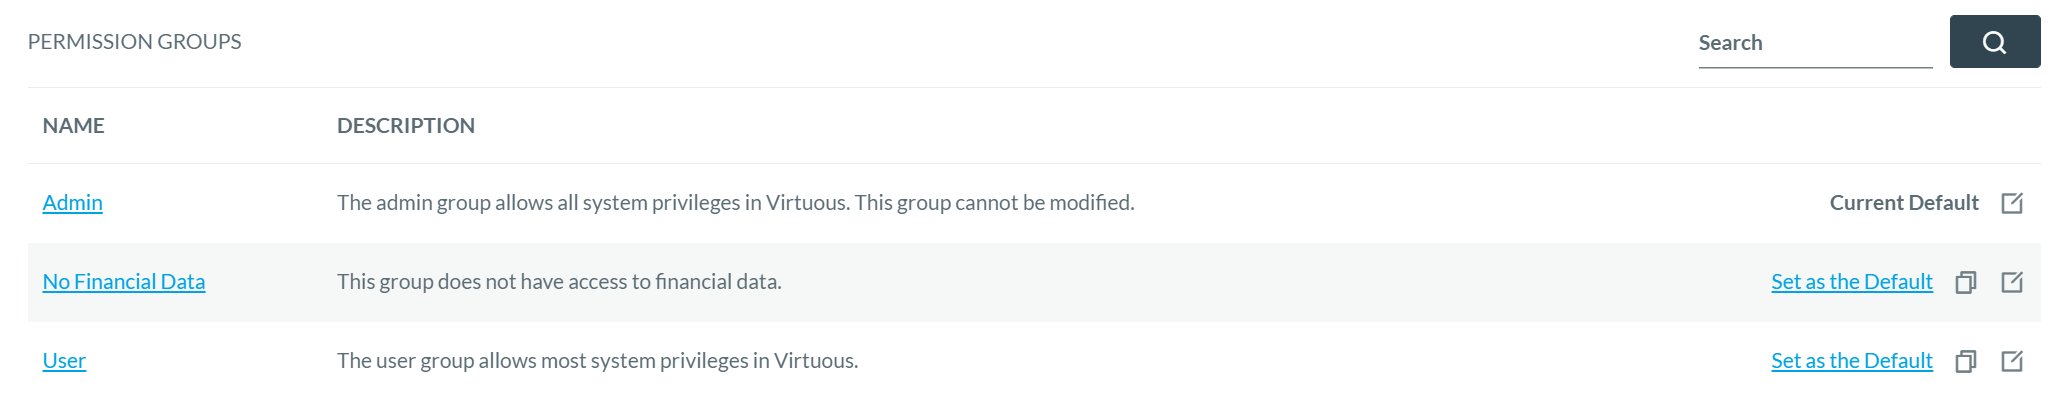 Permission_Groups.PNG